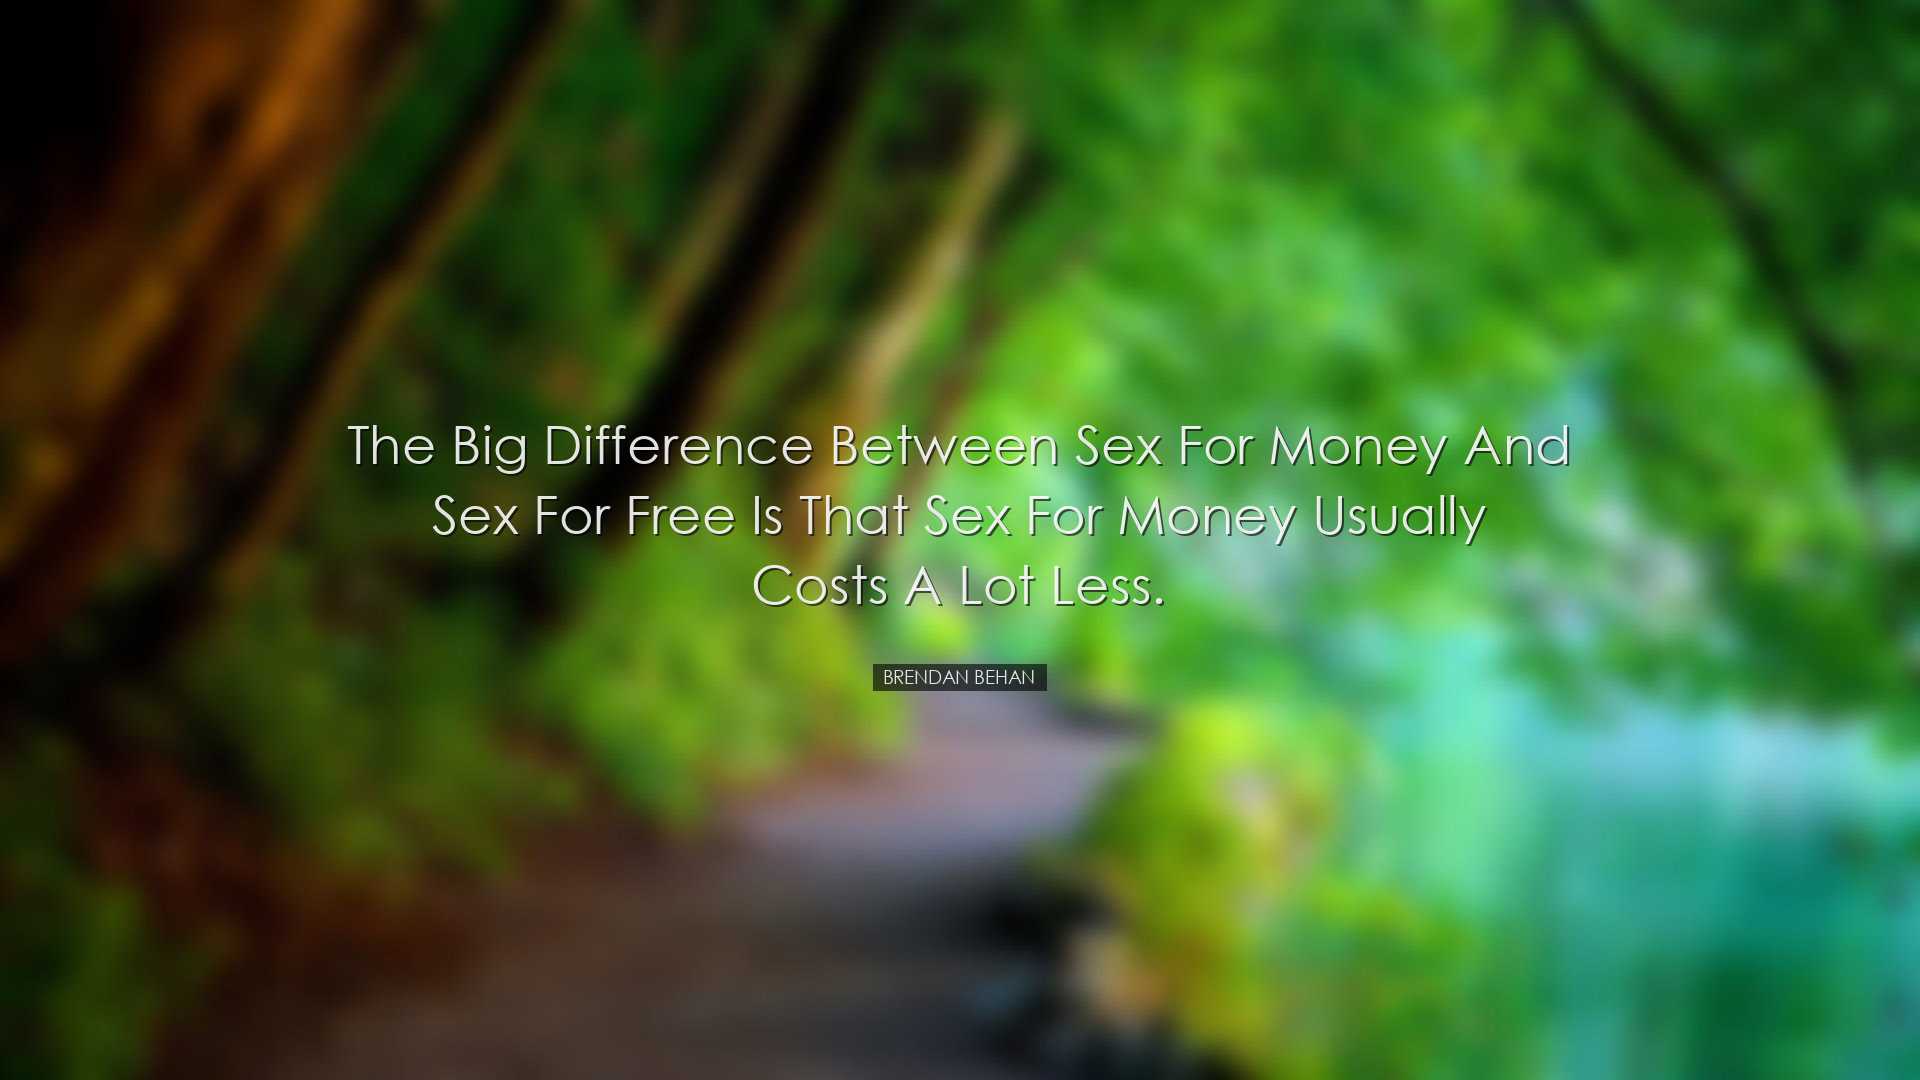 The big difference between sex for money and sex for free is that